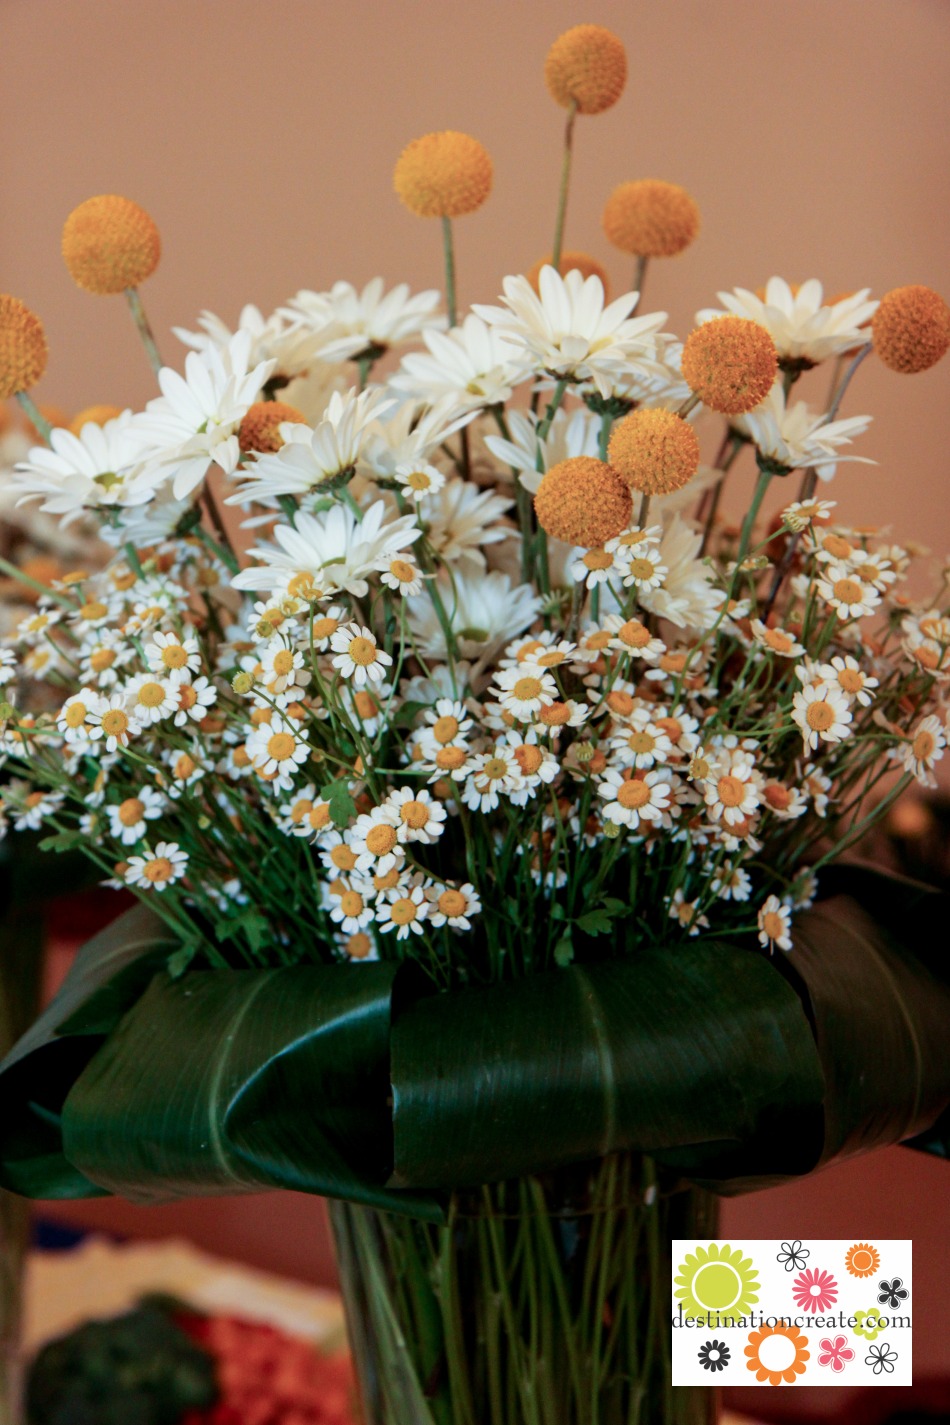 Yellow and blue wedding buffet centerpieces-white daisies, feverfew and yellow billy balls, Ti leaf collar.